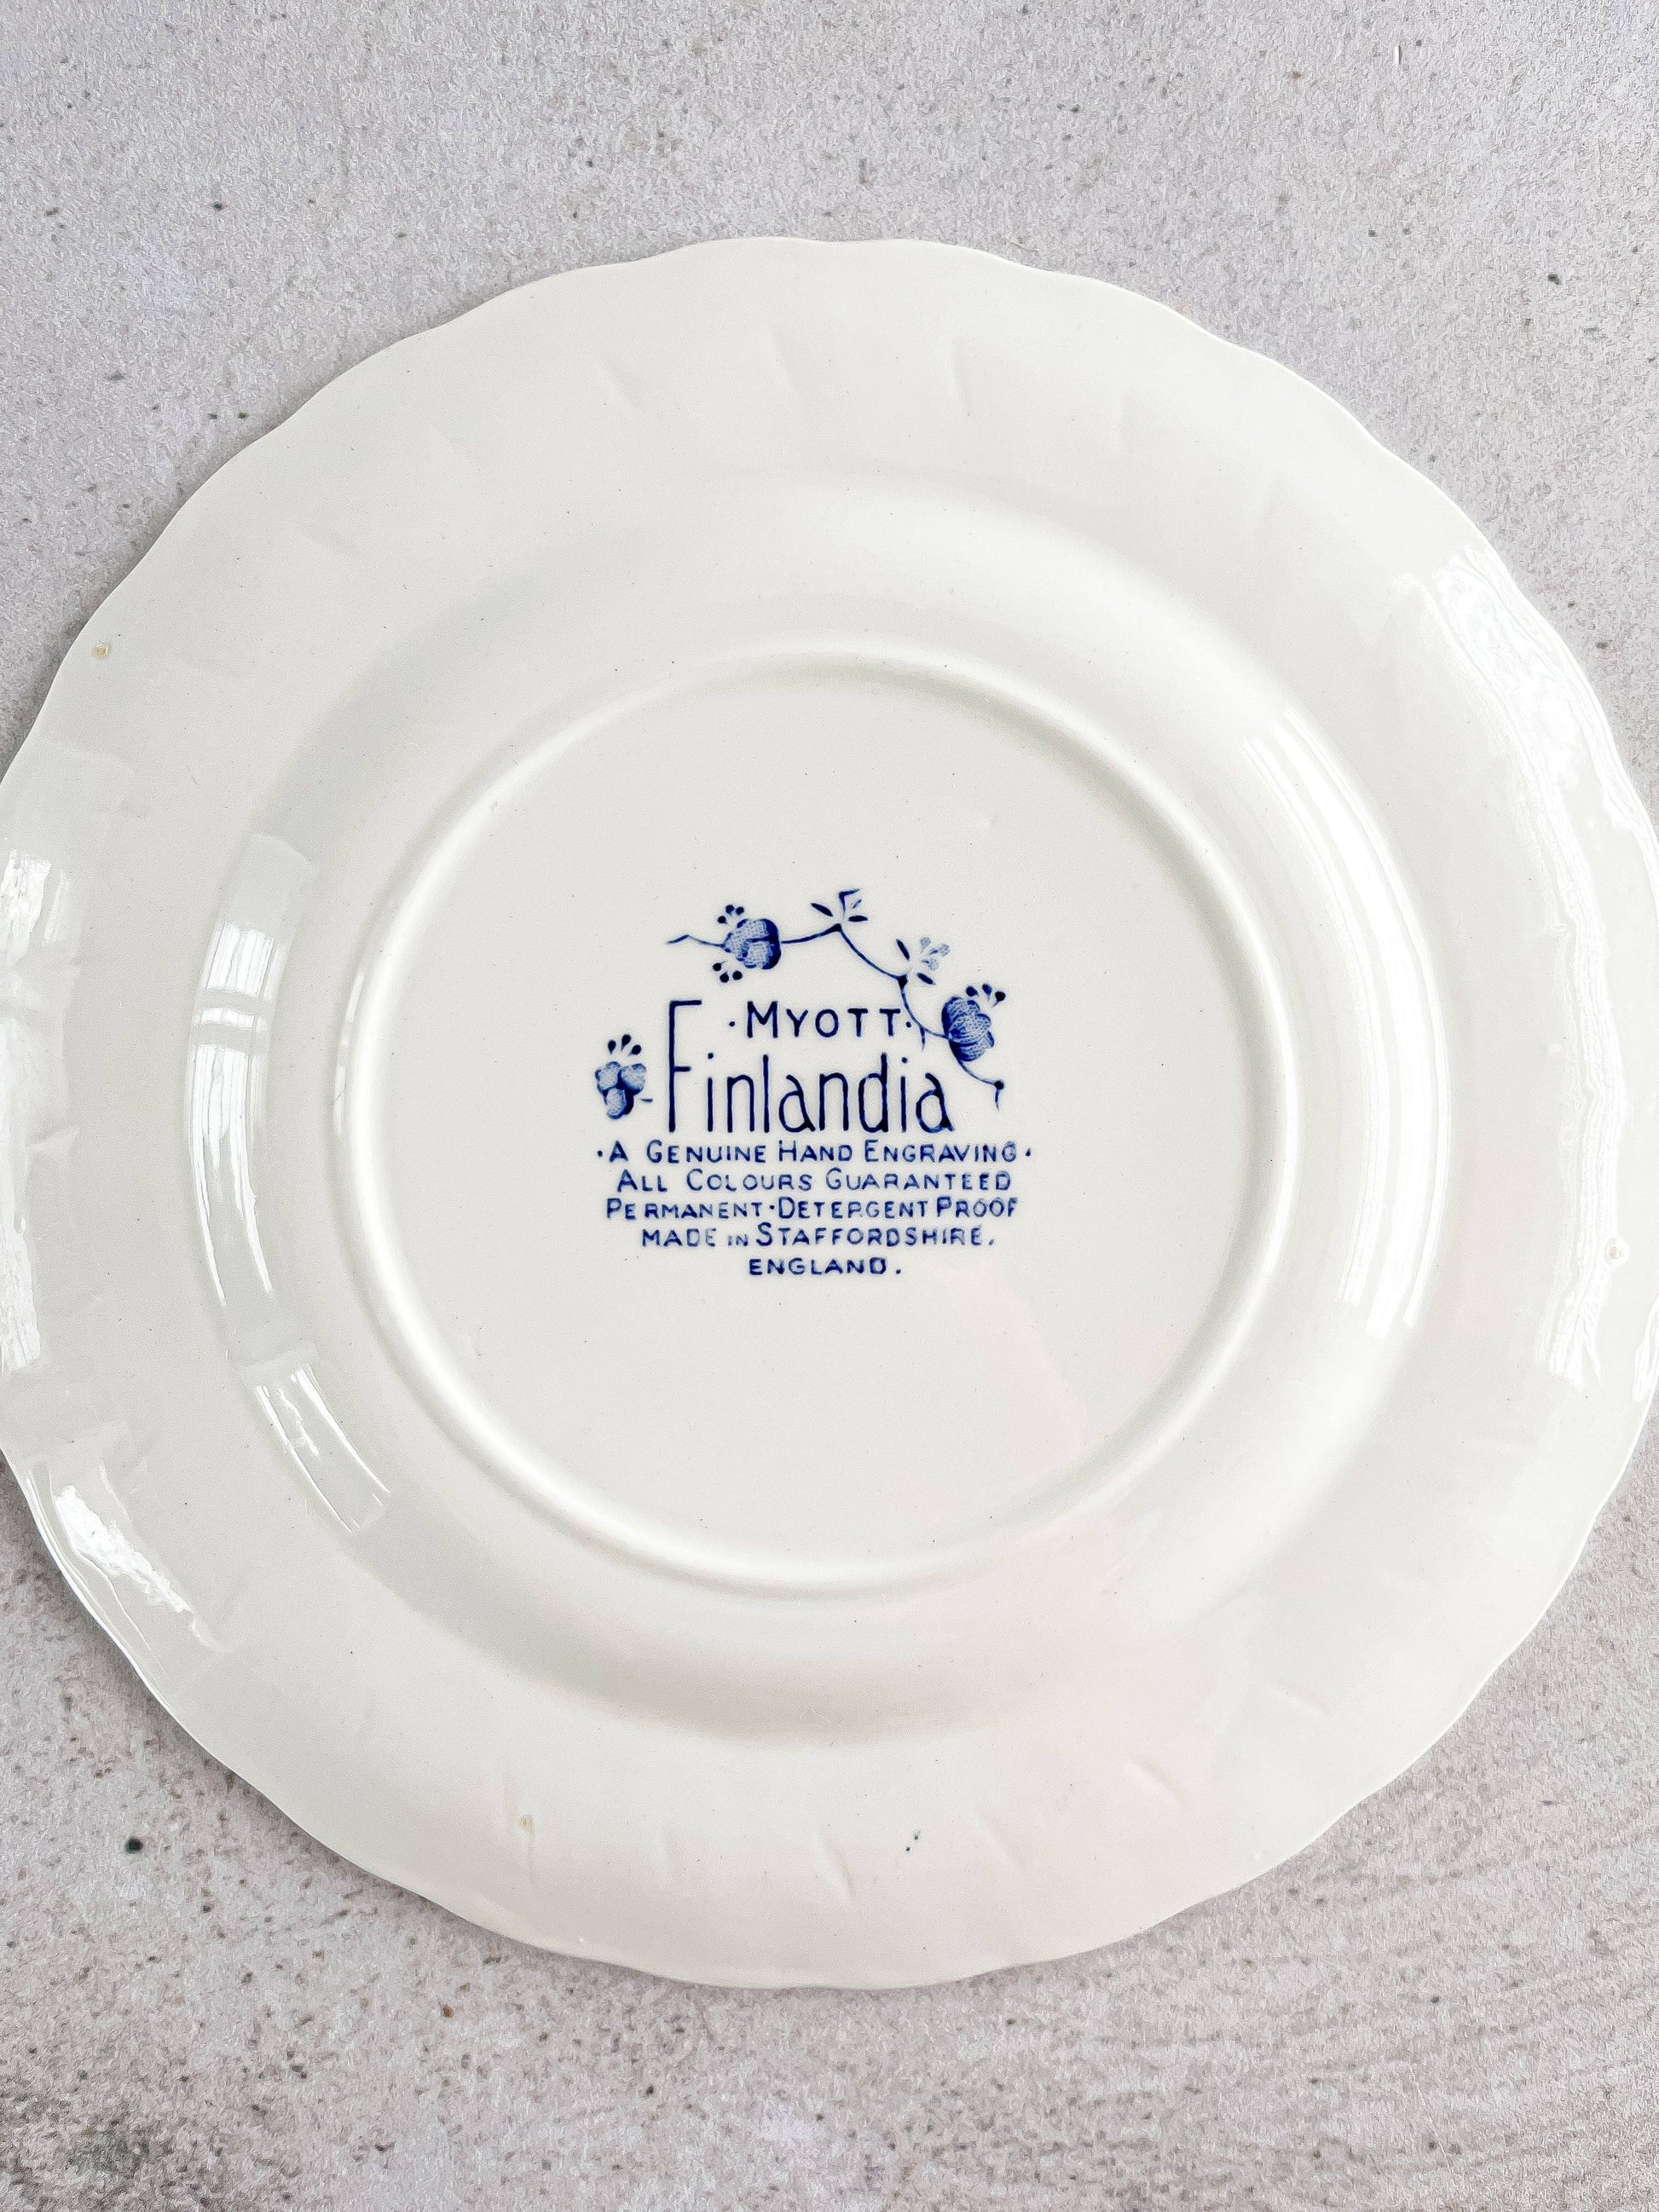 Myott 'Finlandia' 6-Piece Place Setting - 23 Pieces with Dinner, Luncheon, Dessert Plates, and Cereal Bowls - SOSC Home